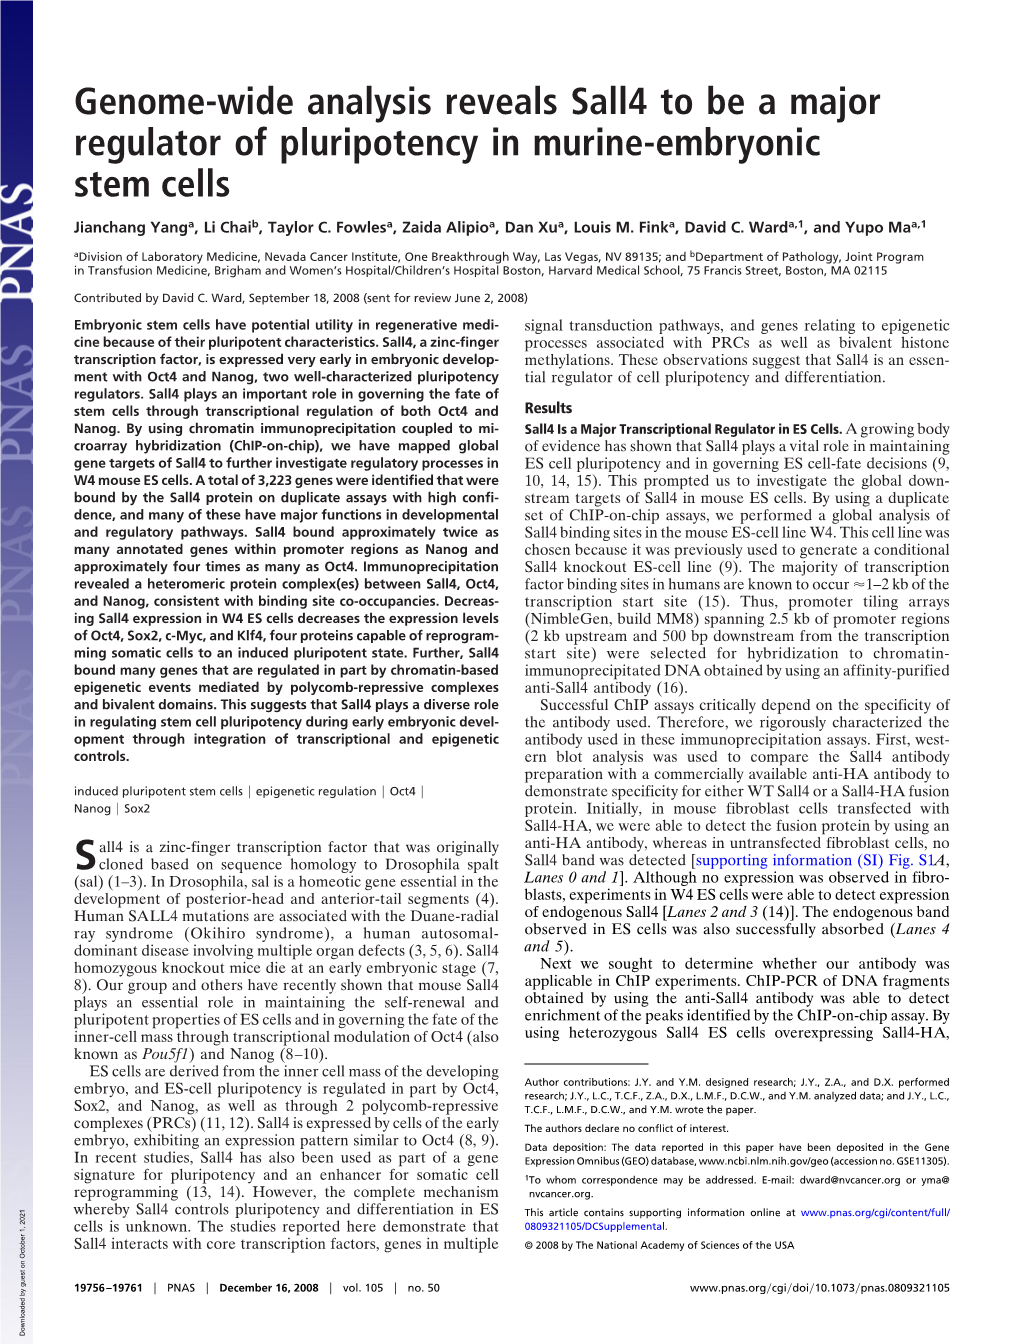 Genome-Wide Analysis Reveals Sall4 to Be a Major Regulator of Pluripotency in Murine-Embryonic Stem Cells